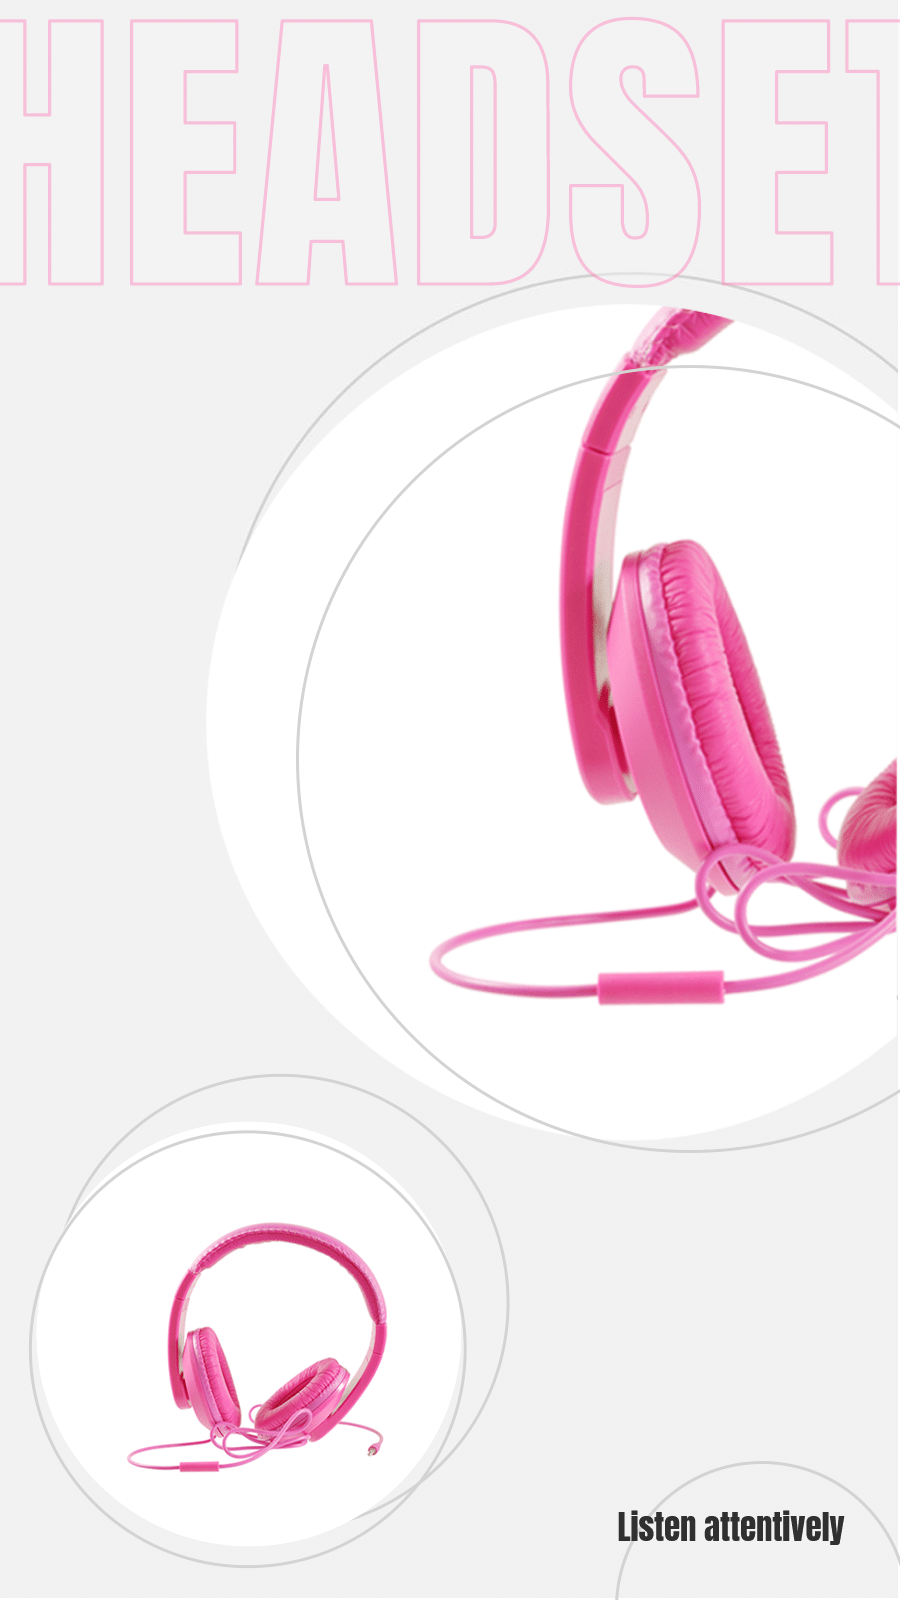 Pink Headphones Product Details Display Ecommerce Story预览效果